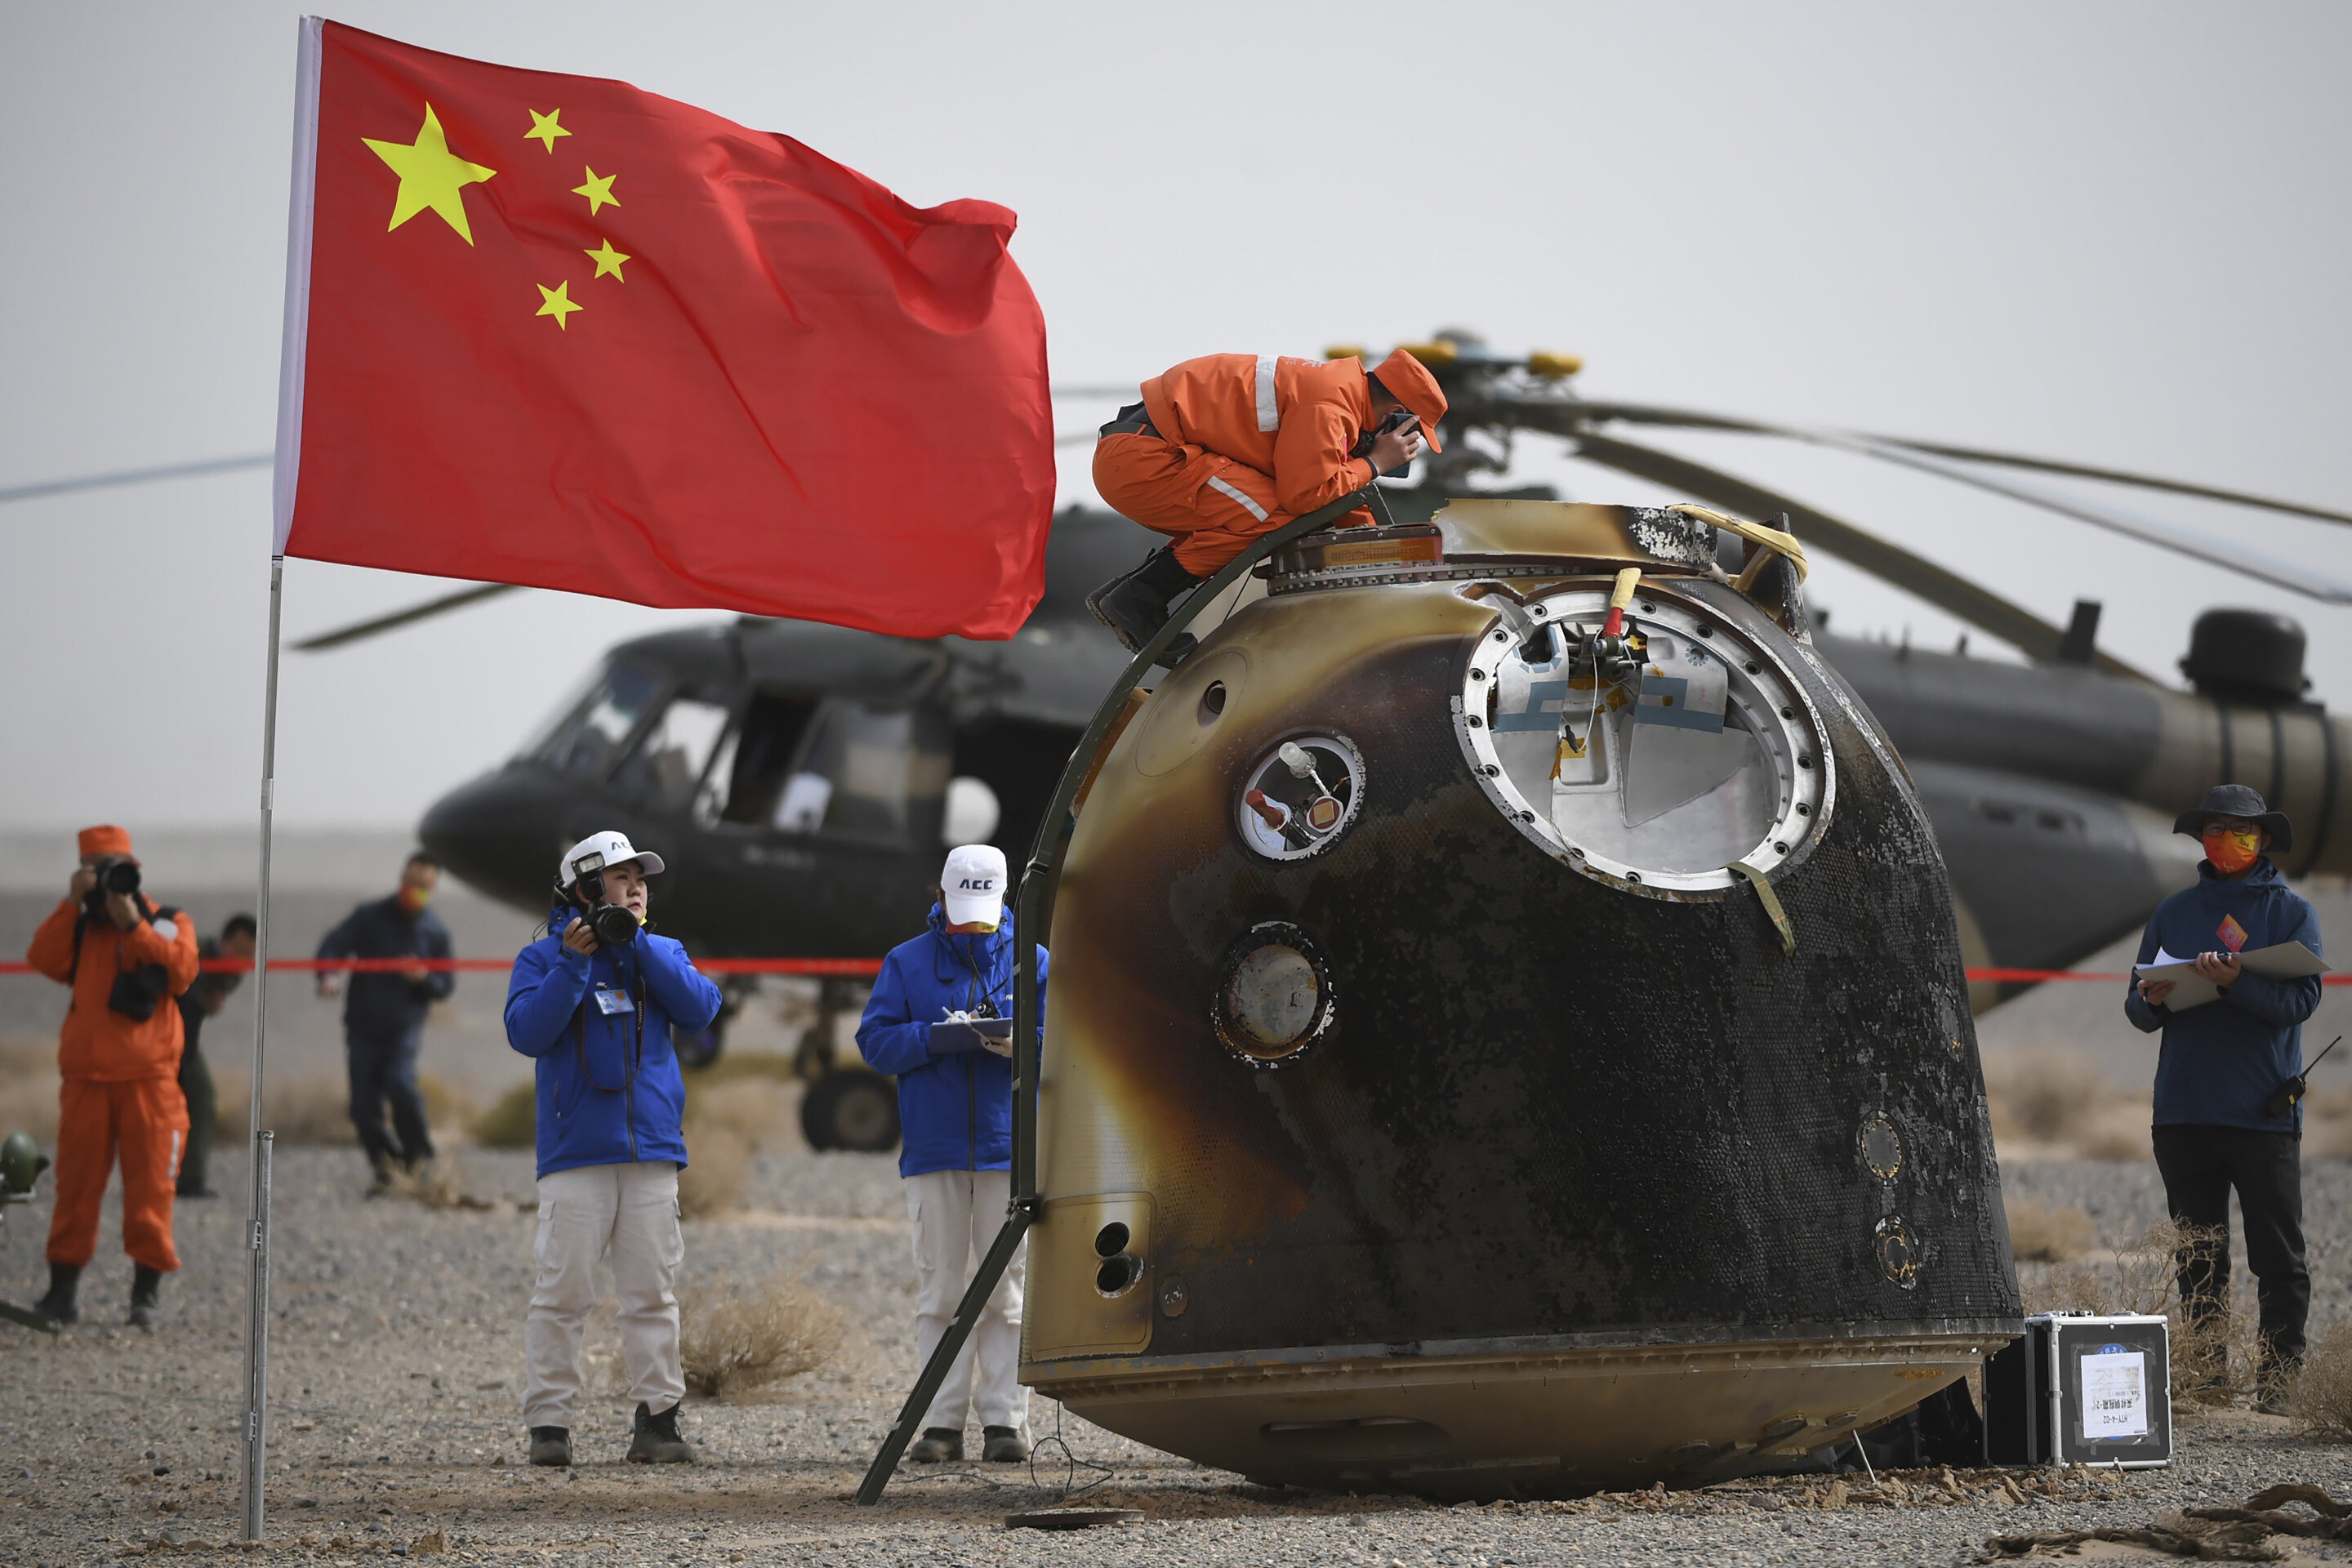 #China sending up next space station crew in June